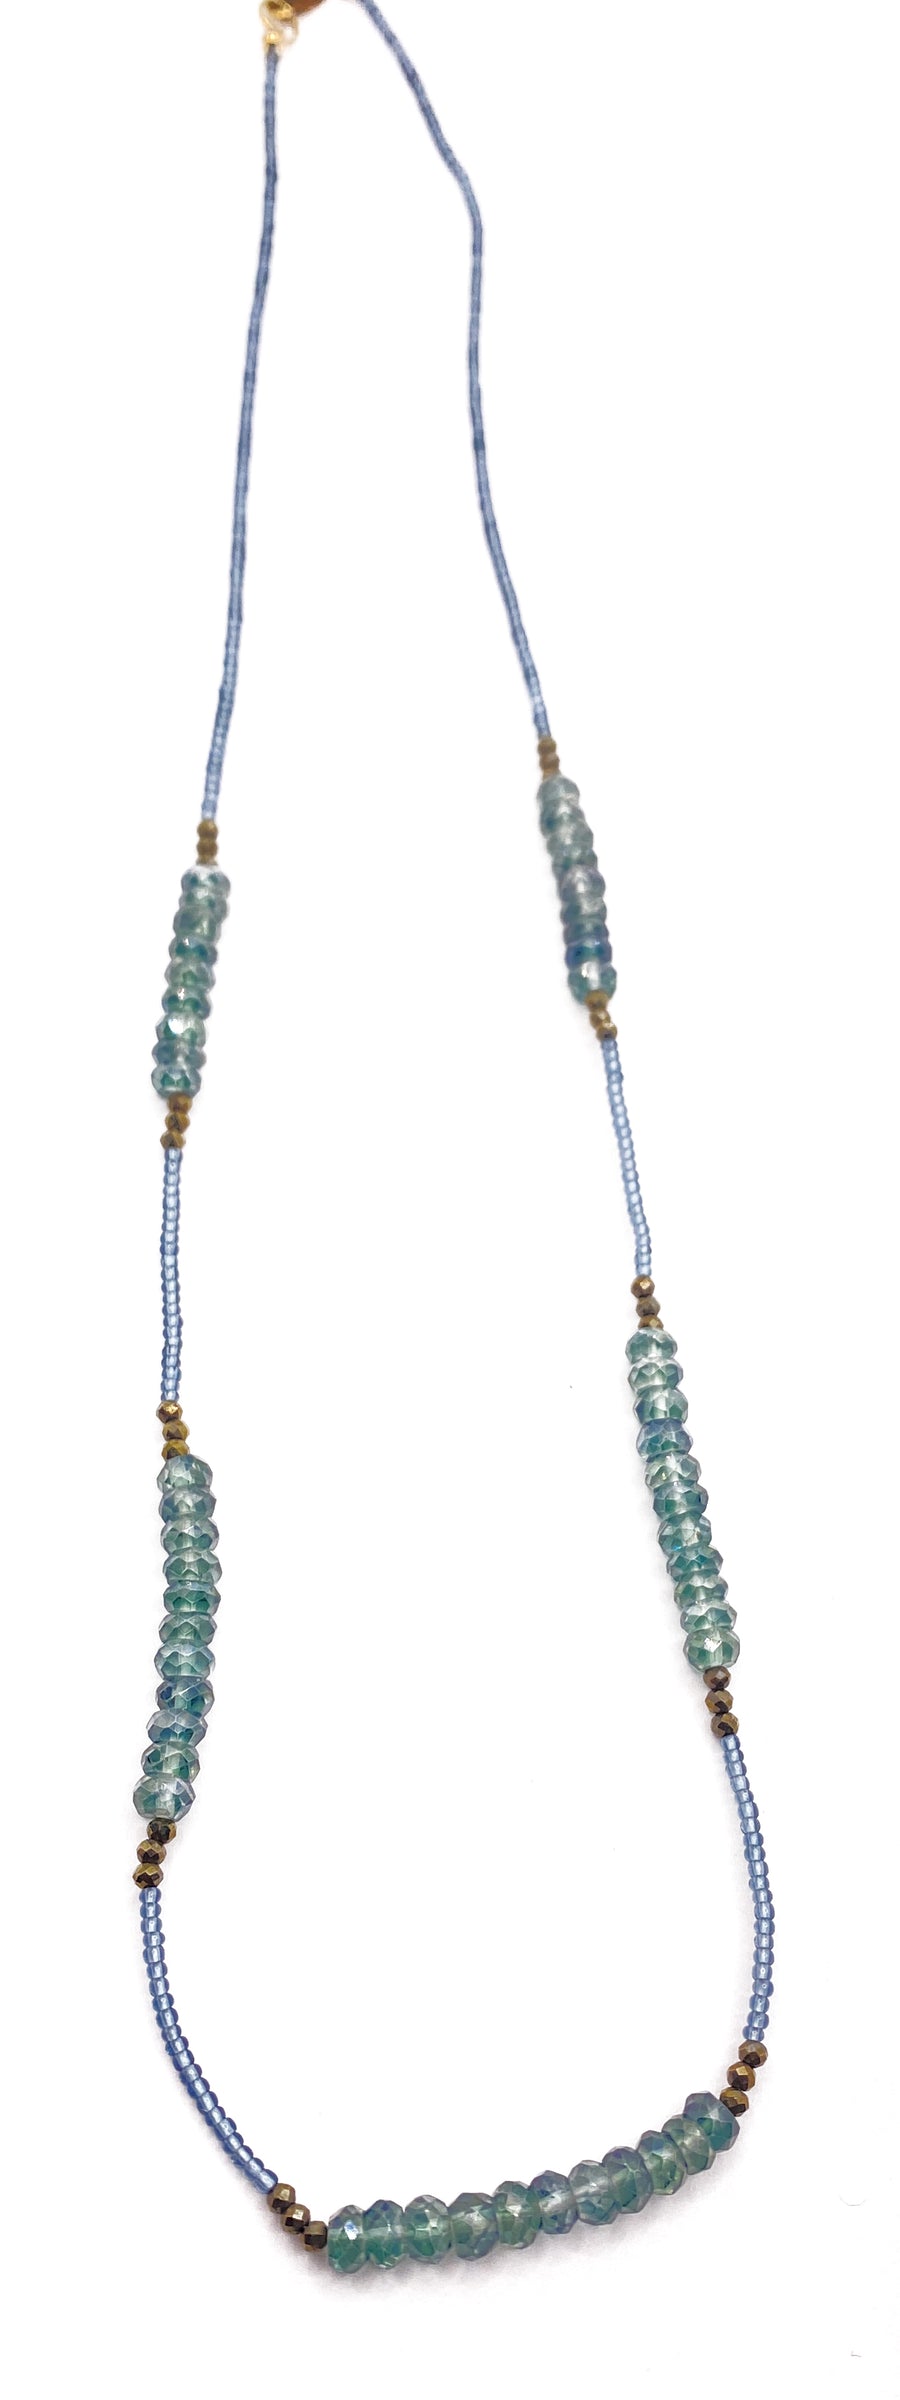 Debbie Fisher | Grey Glass, Pyrite, and Mystic Quartz Bead with Gold Fill Clasp Necklace